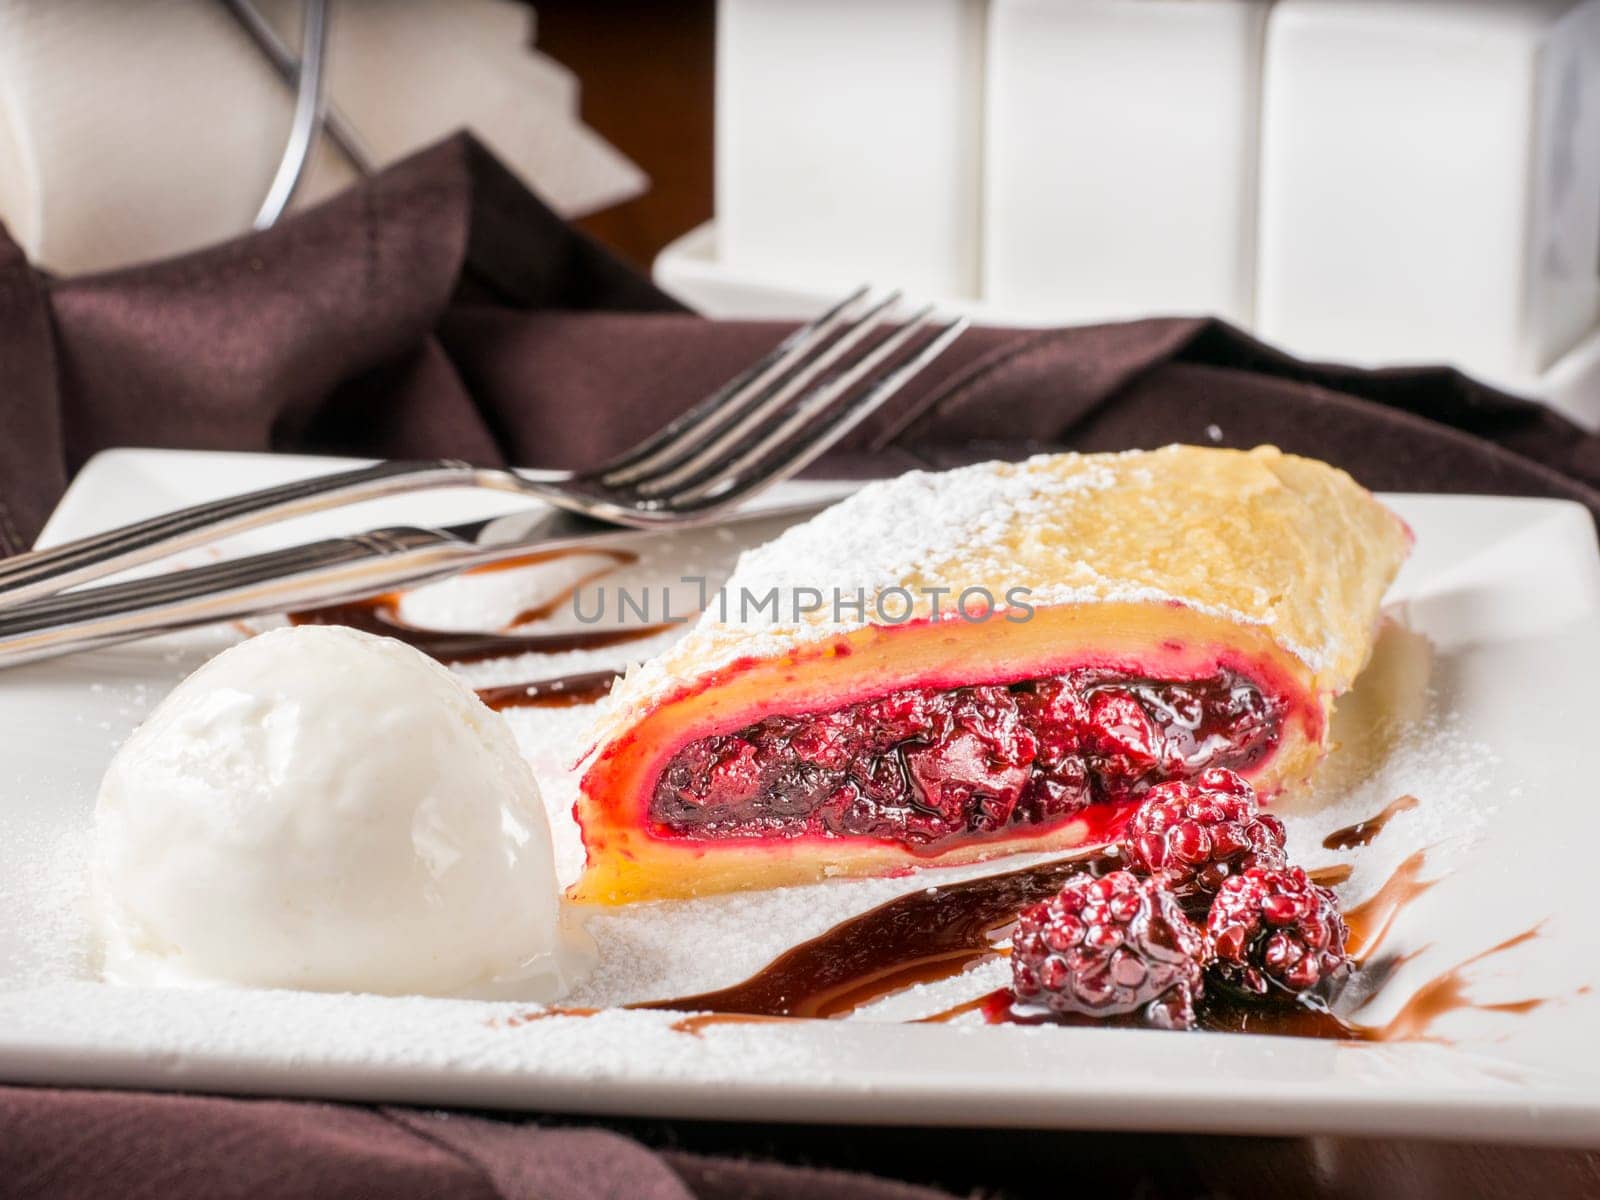 Sweet dessert - strudel with cherry and blackberry on white plate with ice cream at restaurant table